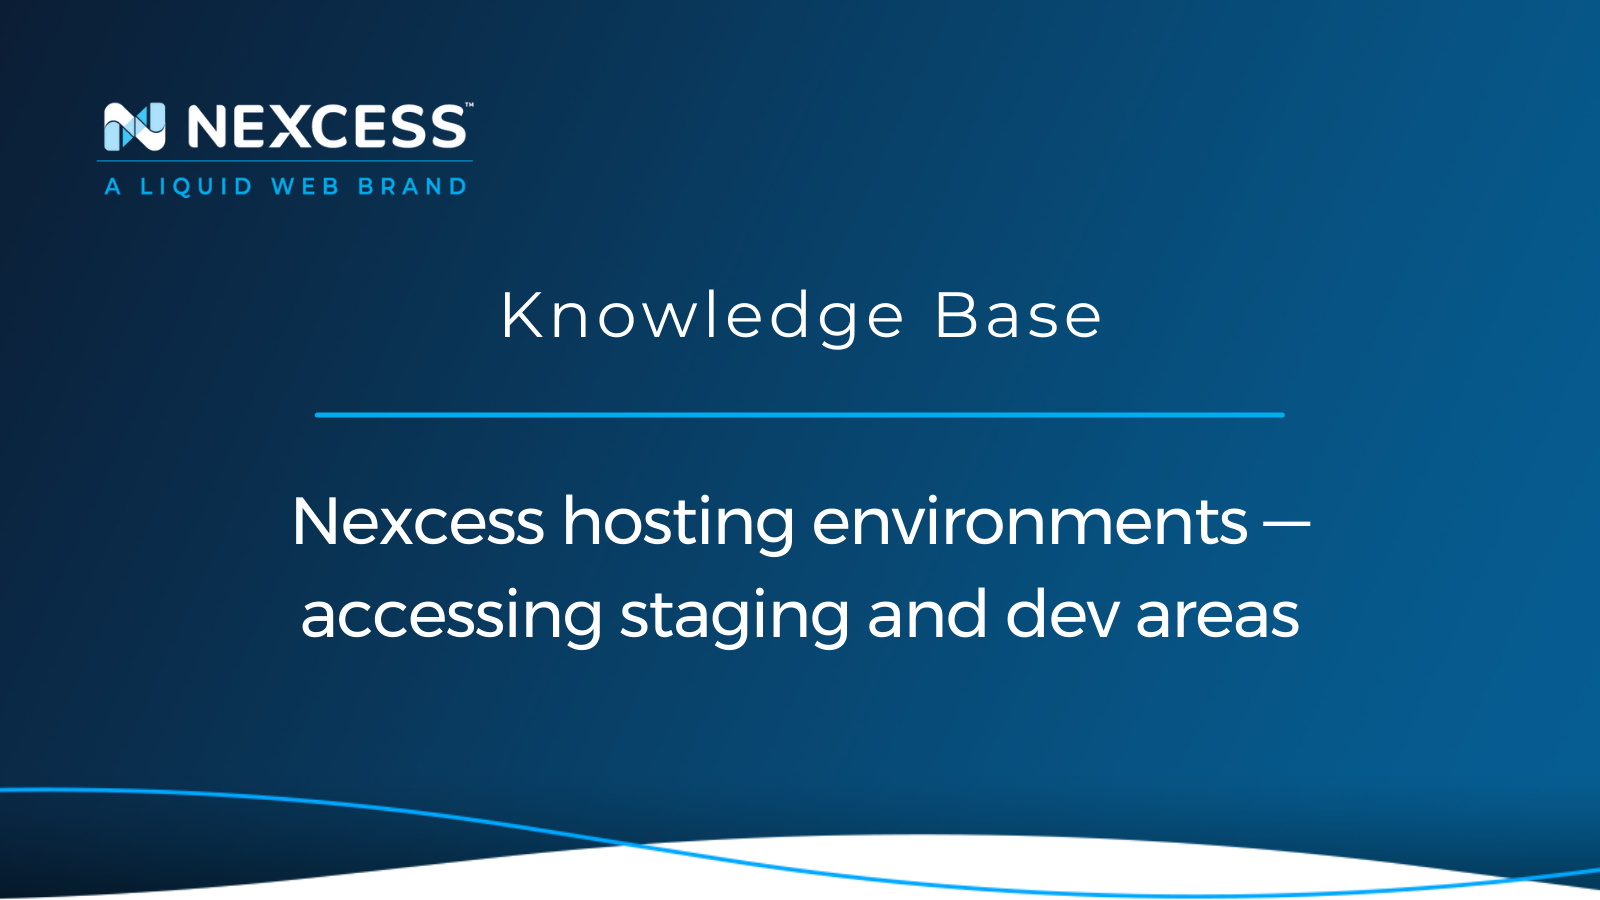 Nexcess hosting environments — accessing staging and dev areas